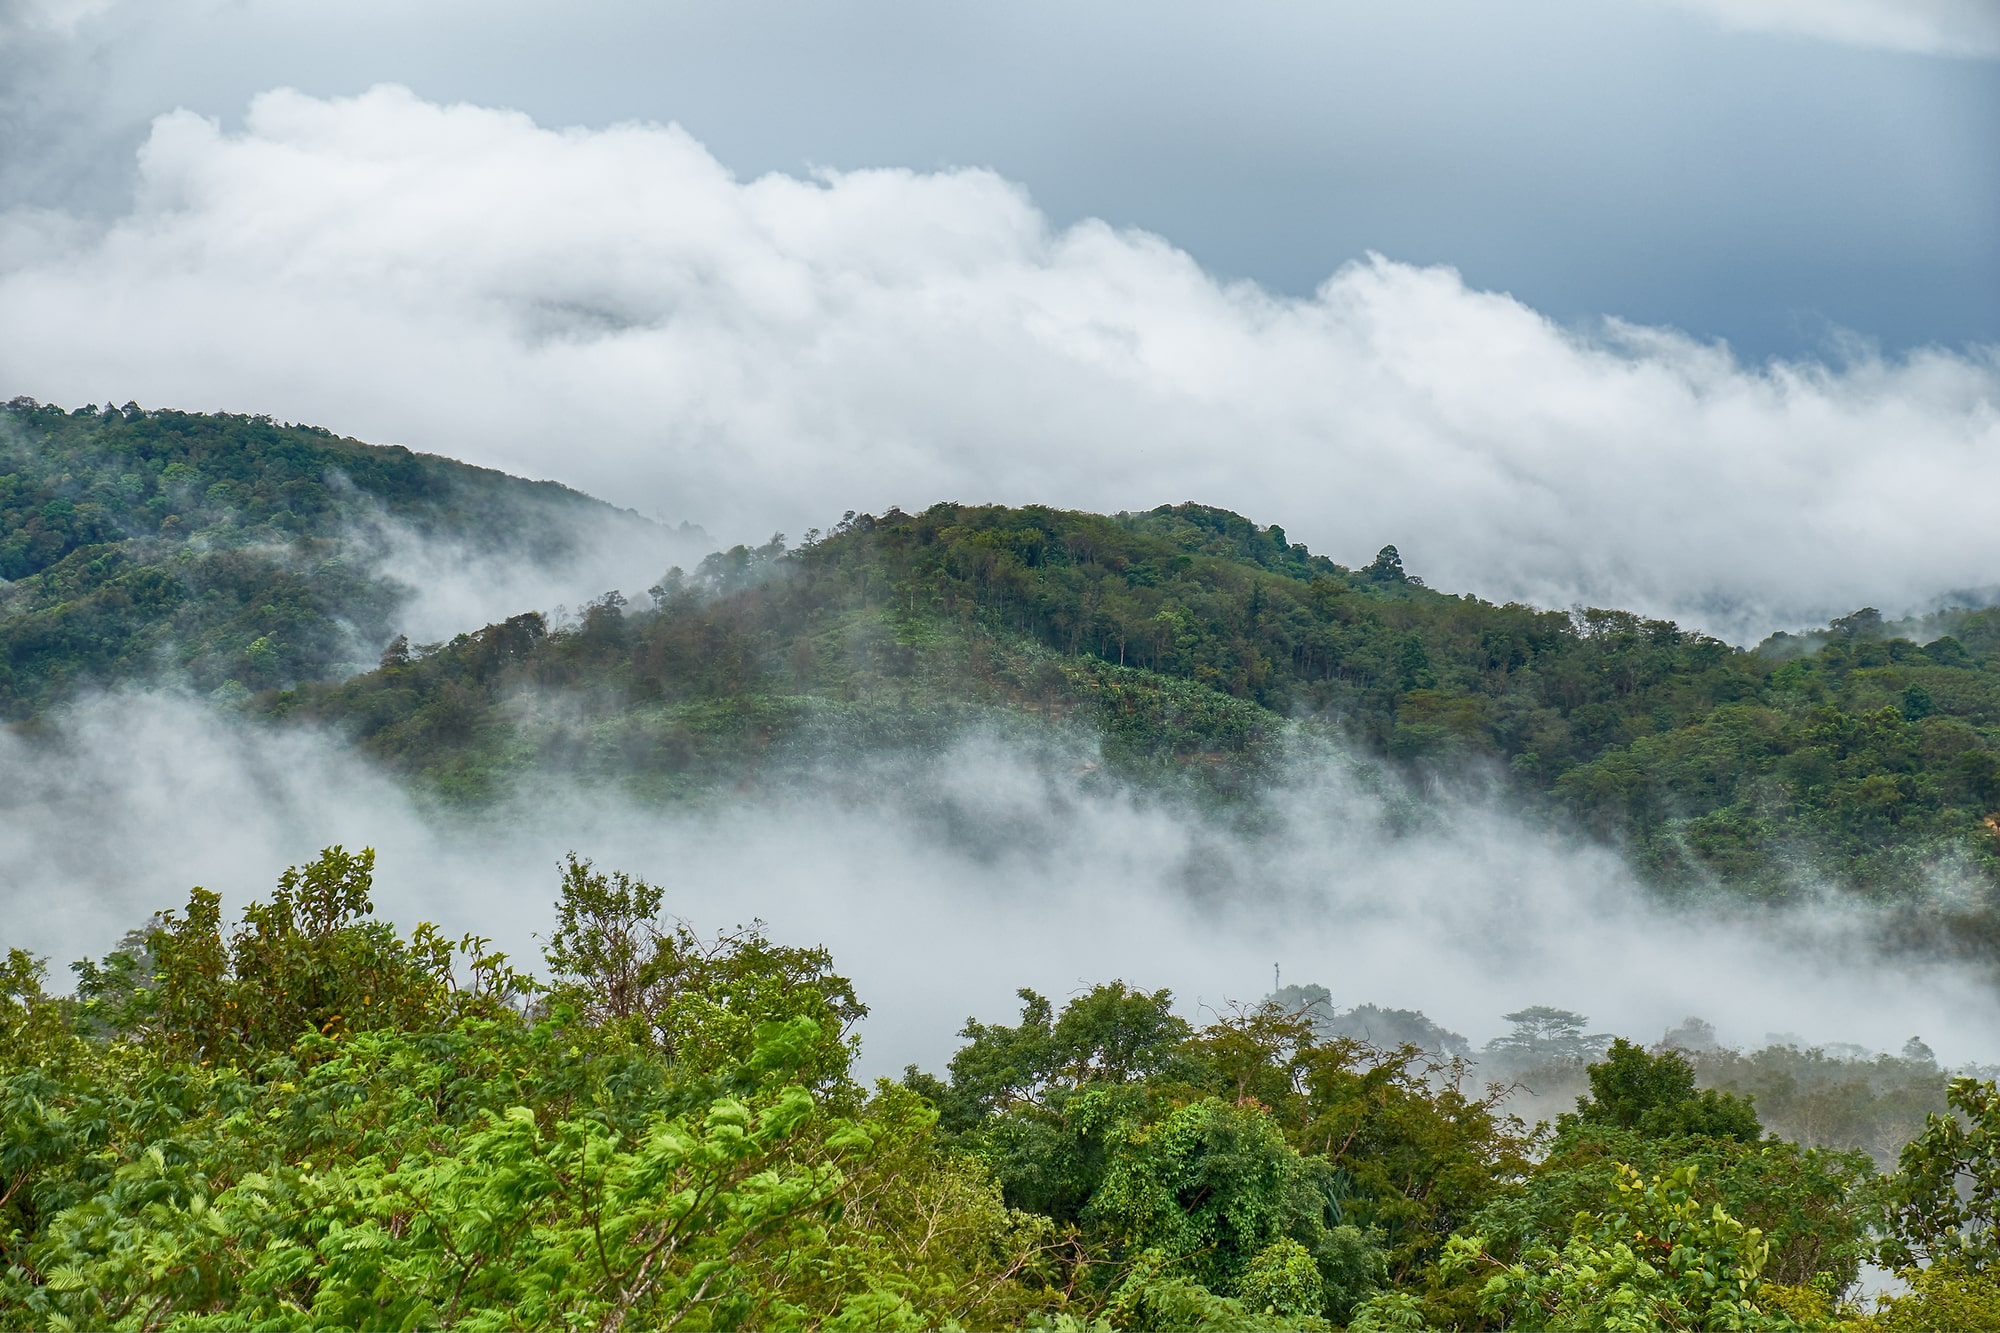 Forests can create clouds – scientists